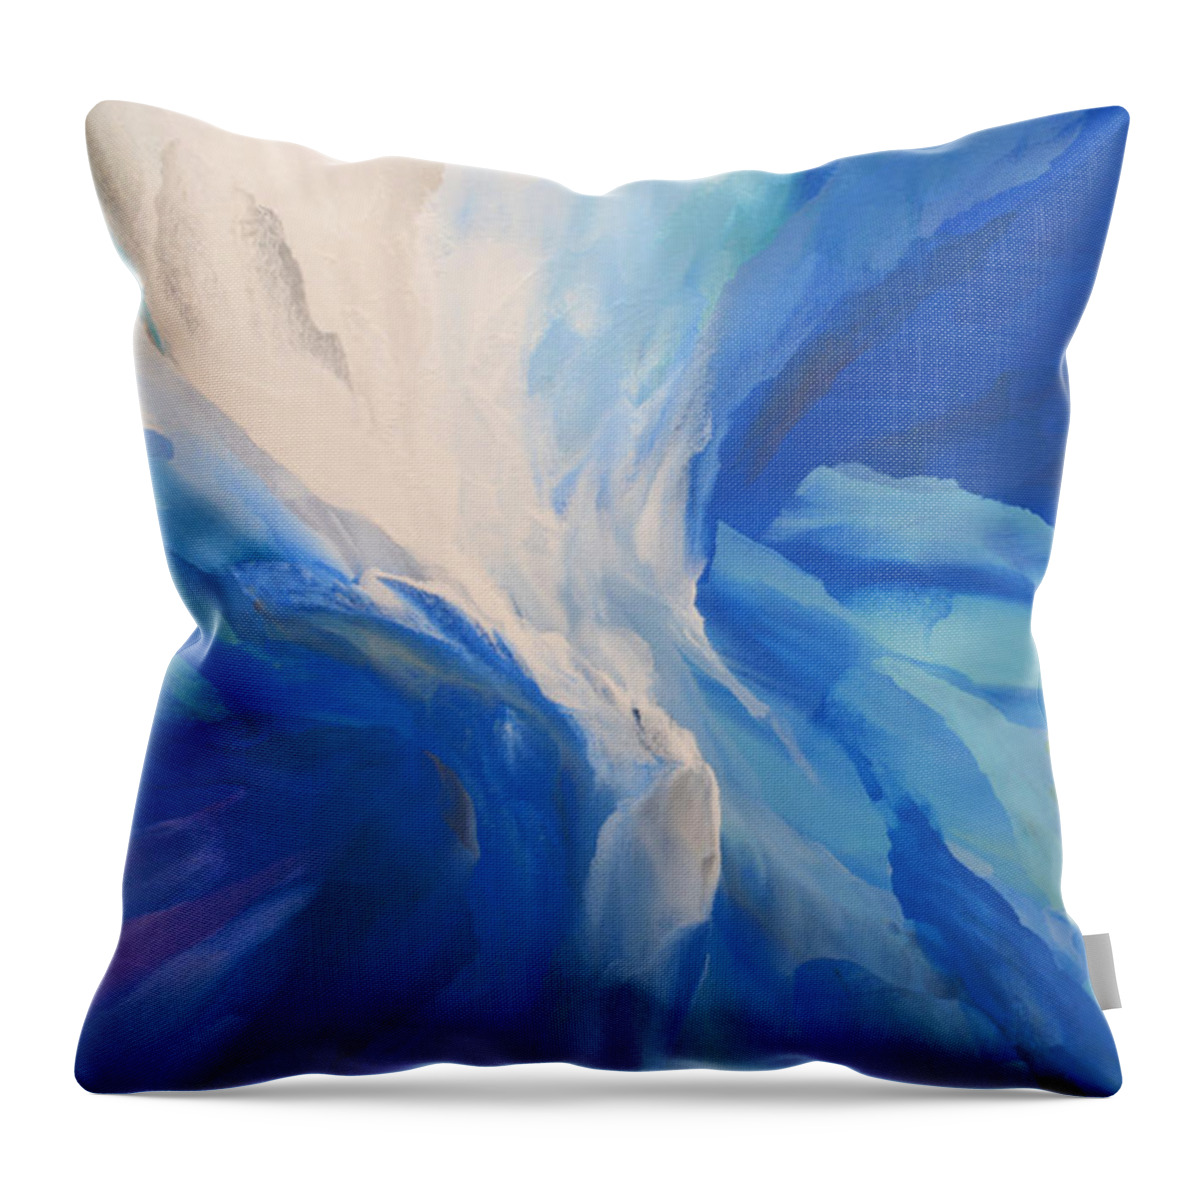 Sky Throw Pillow featuring the painting Lifted Up by Linda Bailey